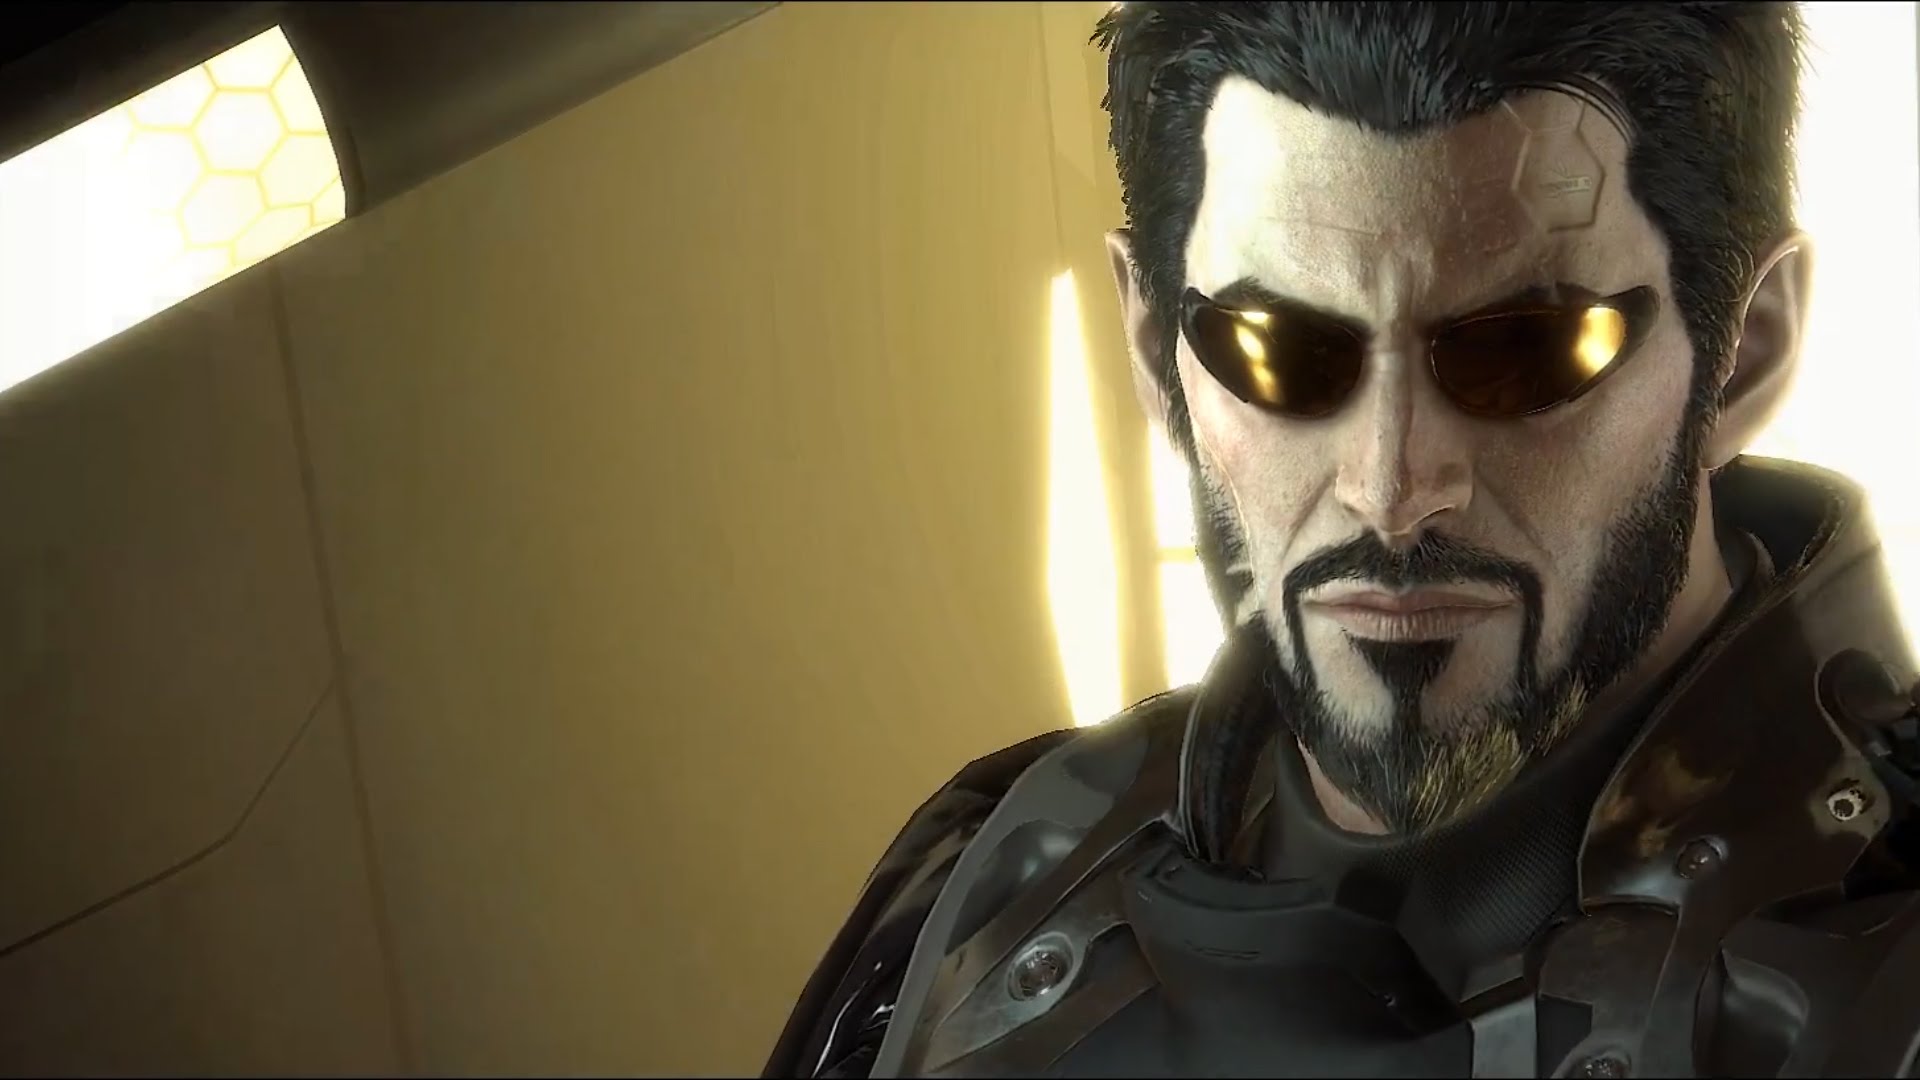 Deus Ex Mankind Divided Hd Wallpaper Background Image Images, Photos, Reviews